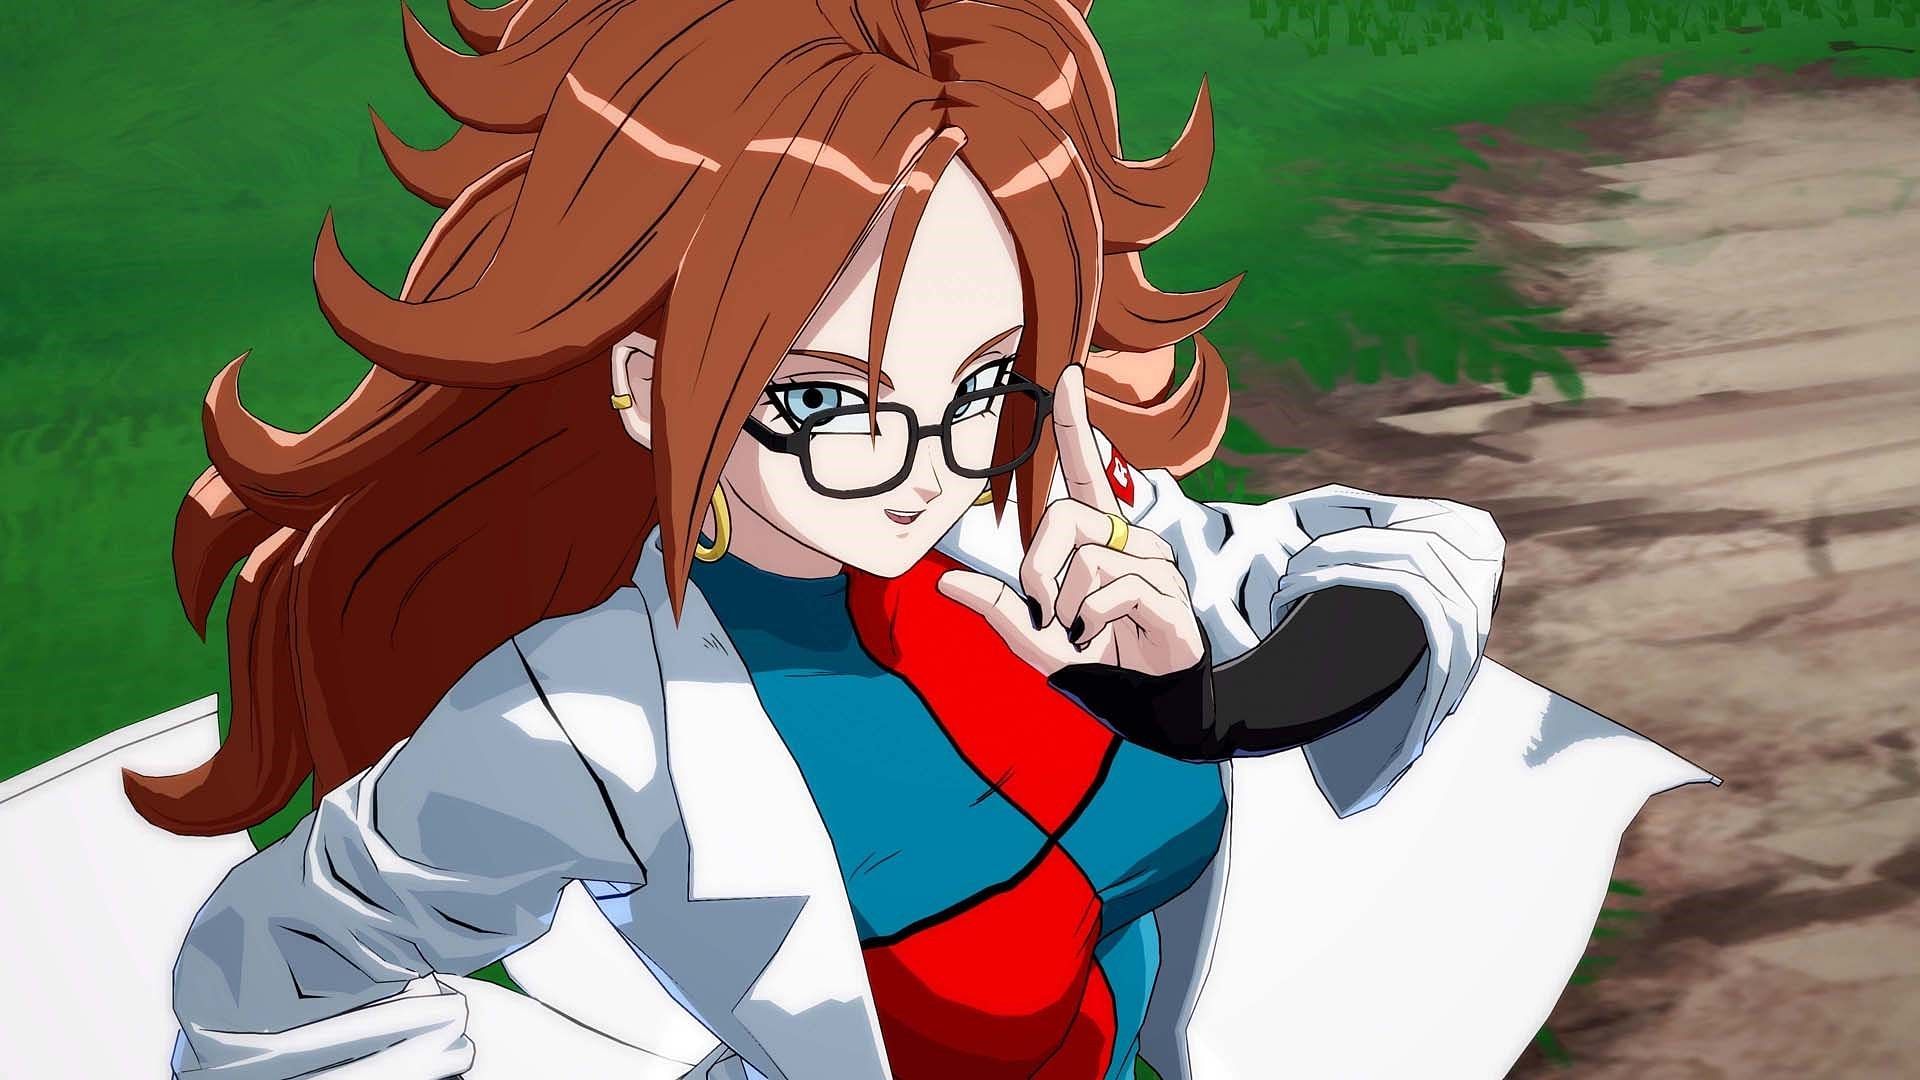 Android 21 as she appears in the Dragon Ball FighterZ game (Image via Arc System Works)